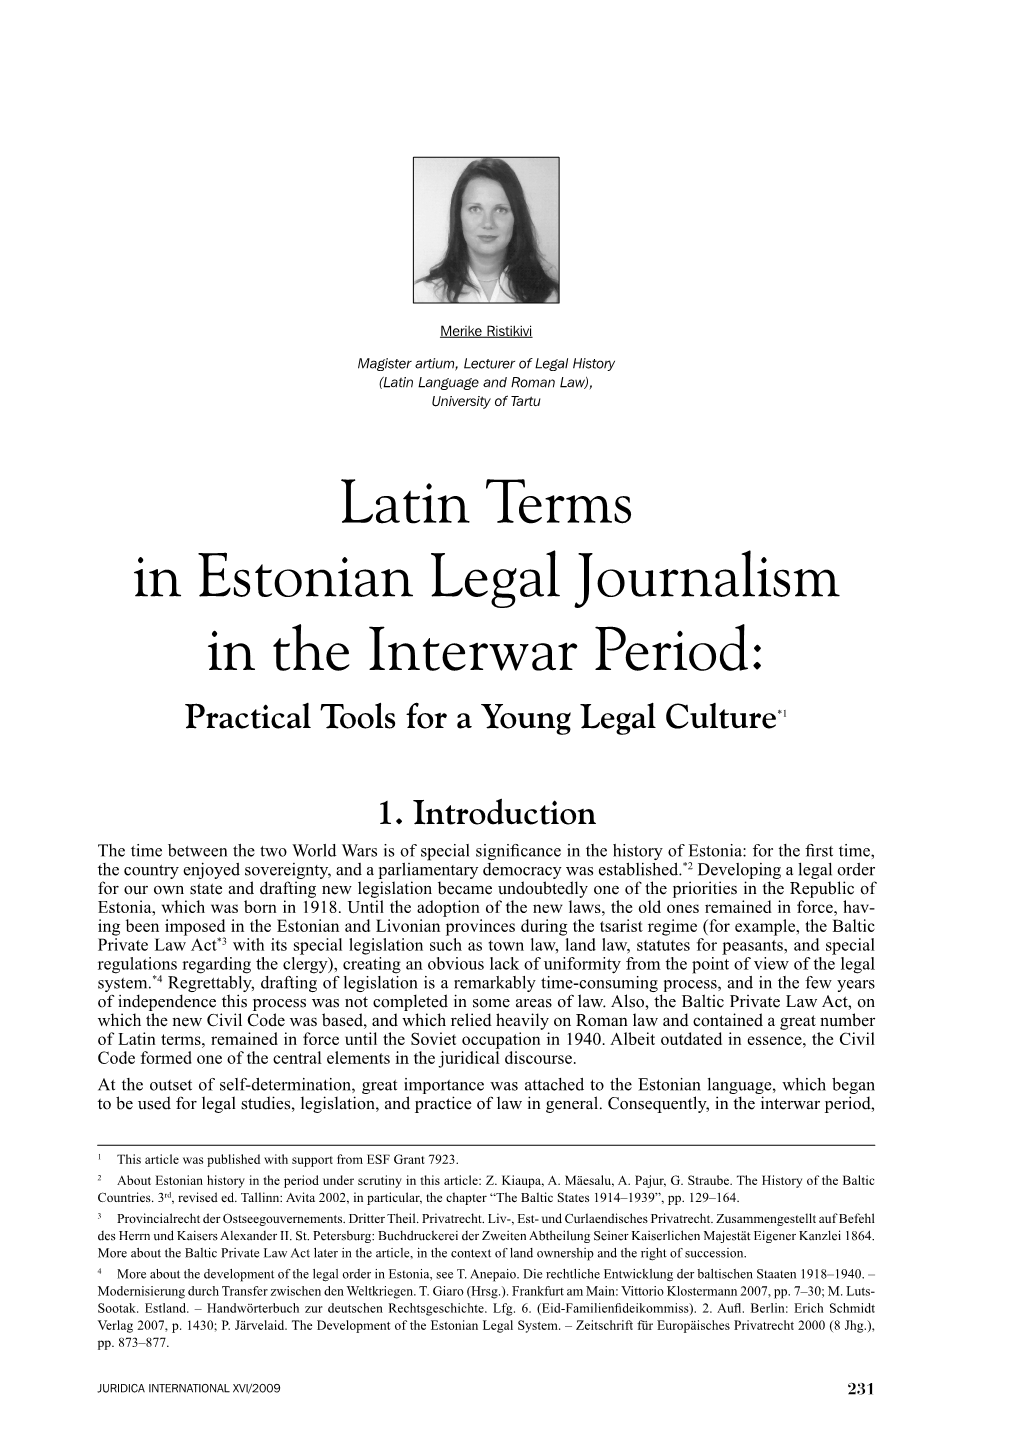 Latin Terms in Estonian Legal Journalism in the Interwar Period: Practical Tools for a Young Legal Culture*1